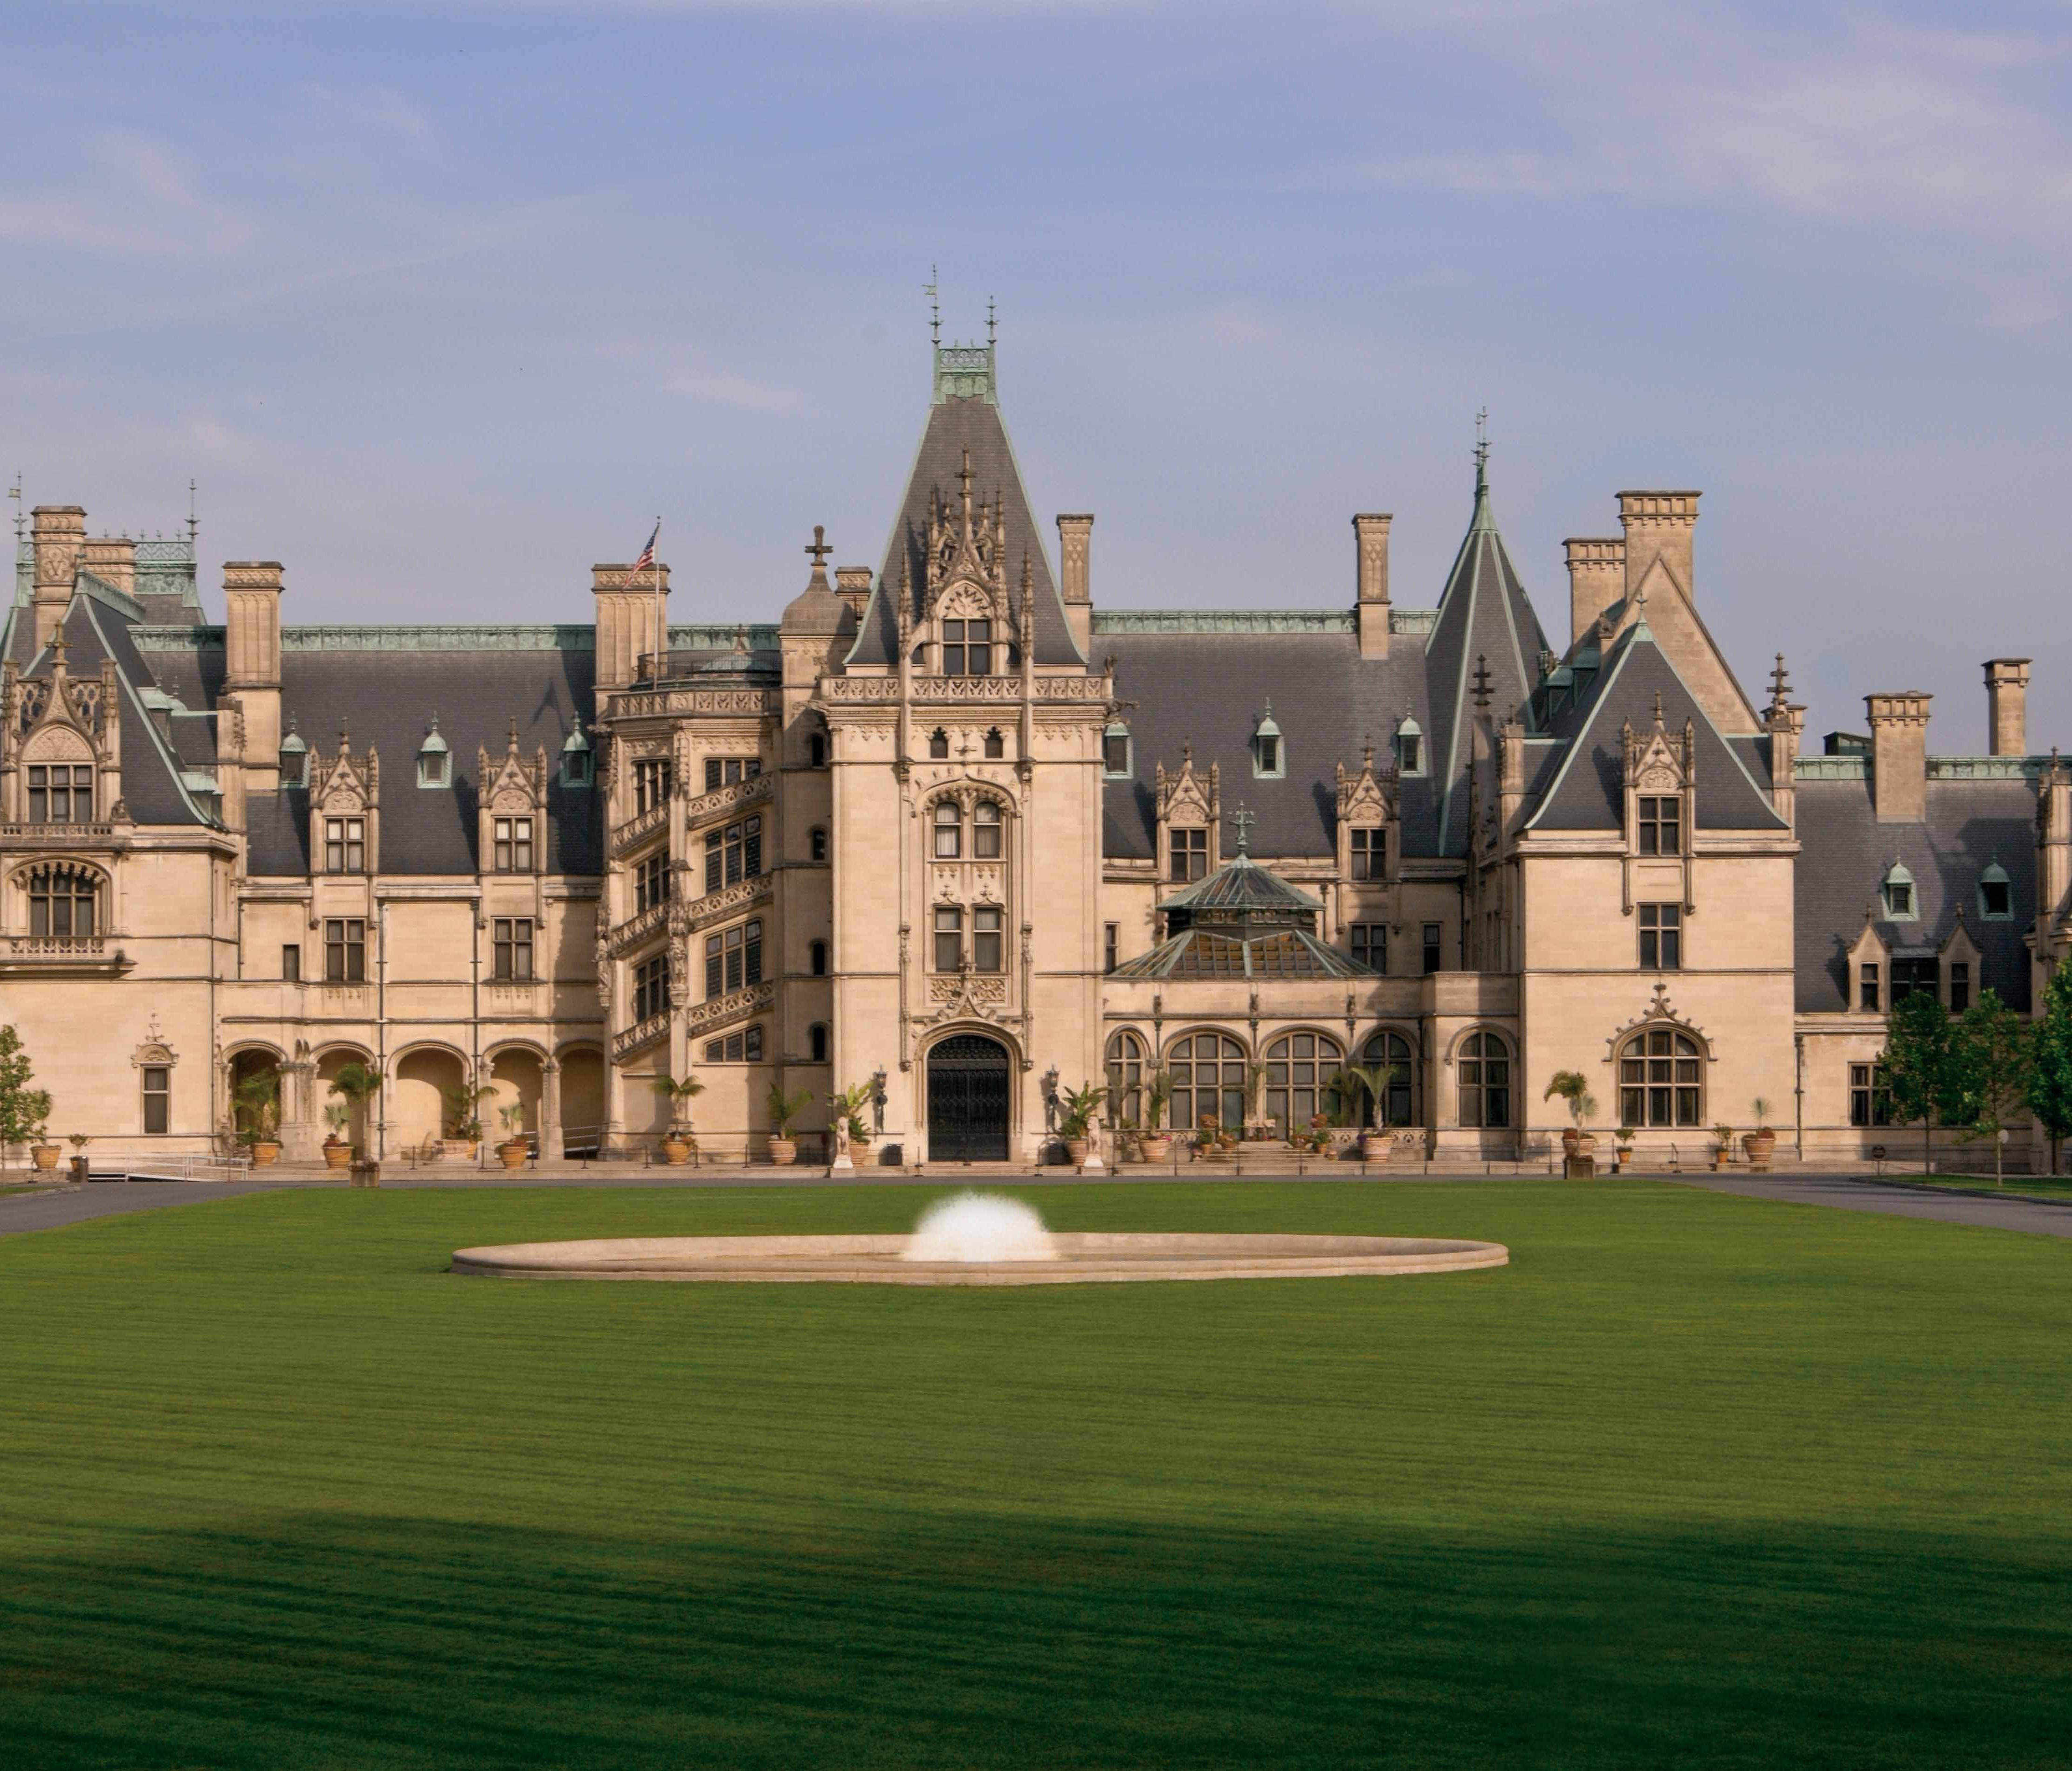 Located in Asheville, Biltmore was the vision of George W. Vanderbilt. Designed by Richard Morris Hunt and opened in 1895, America's largest home is a 250-room French Renaissance chateau, exhibiting the Vanderbilt family's original collection of furn